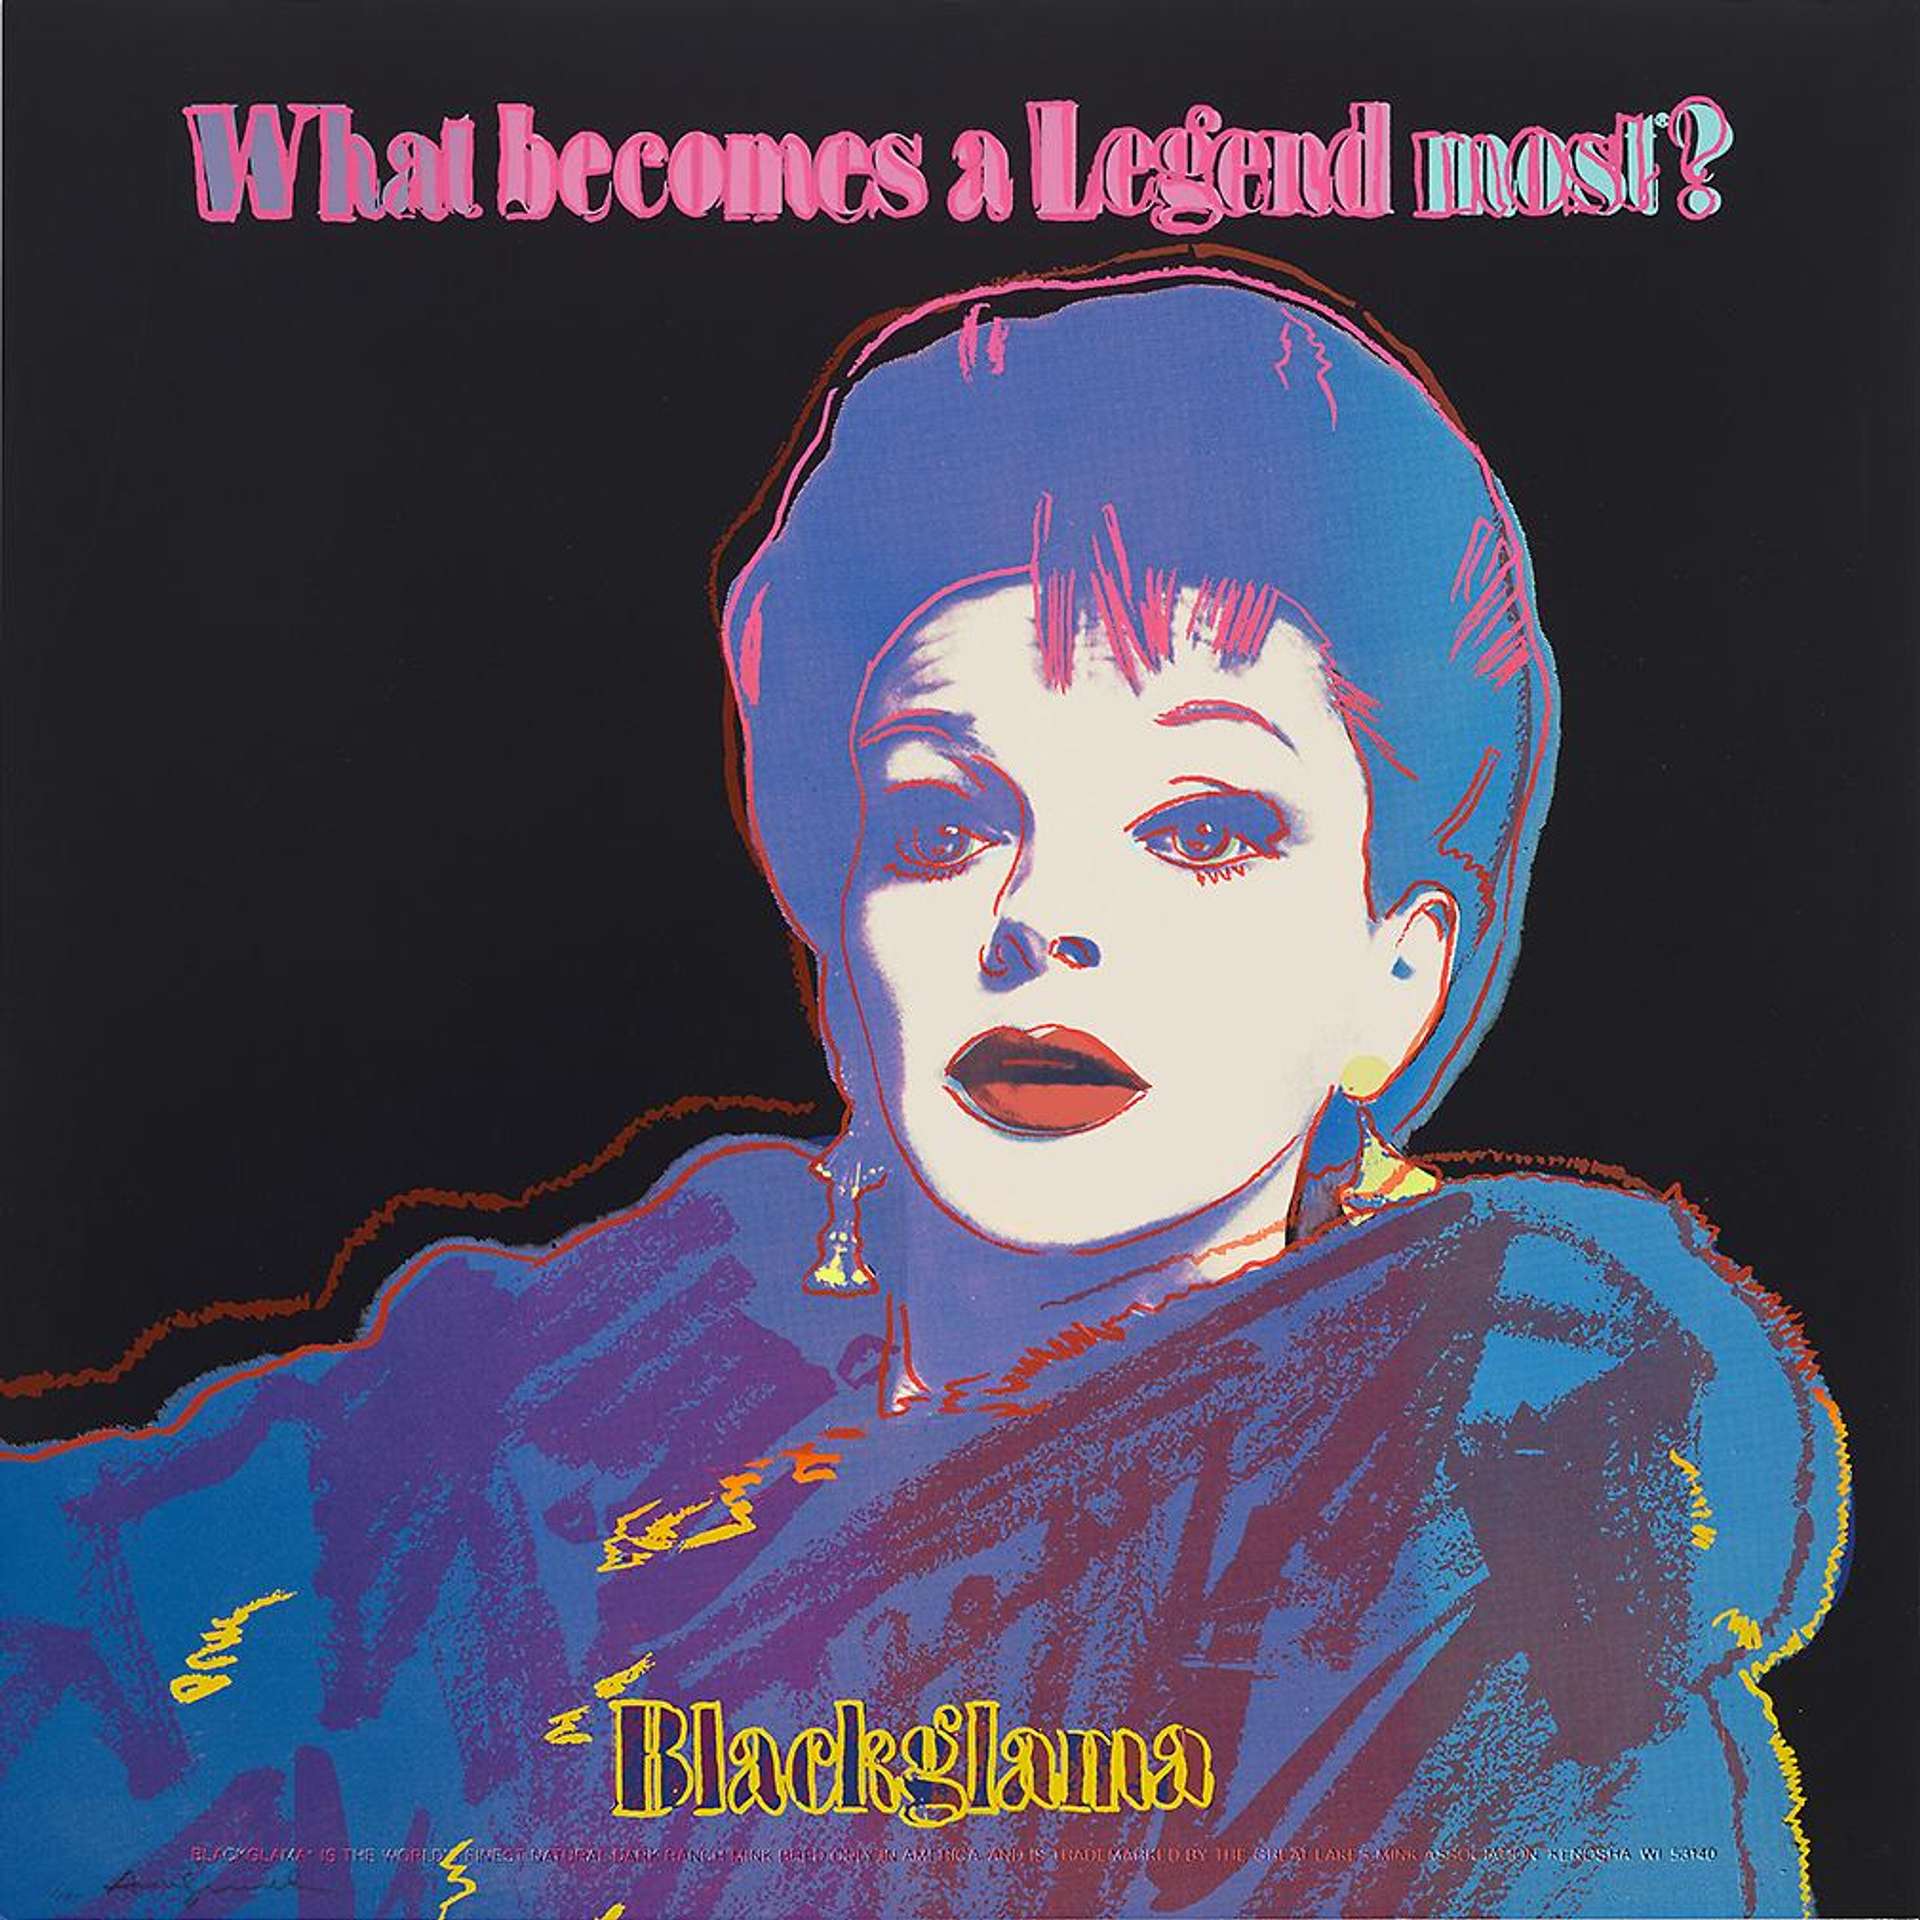 Judy Garland appears to the right of centre in a relaxed, three-quarter profile view. Her skin is awash with white as if glowing in the lights of a movie set. The electric blue, pink and yellow hues against the deep black background elevate her from the surface of the print.